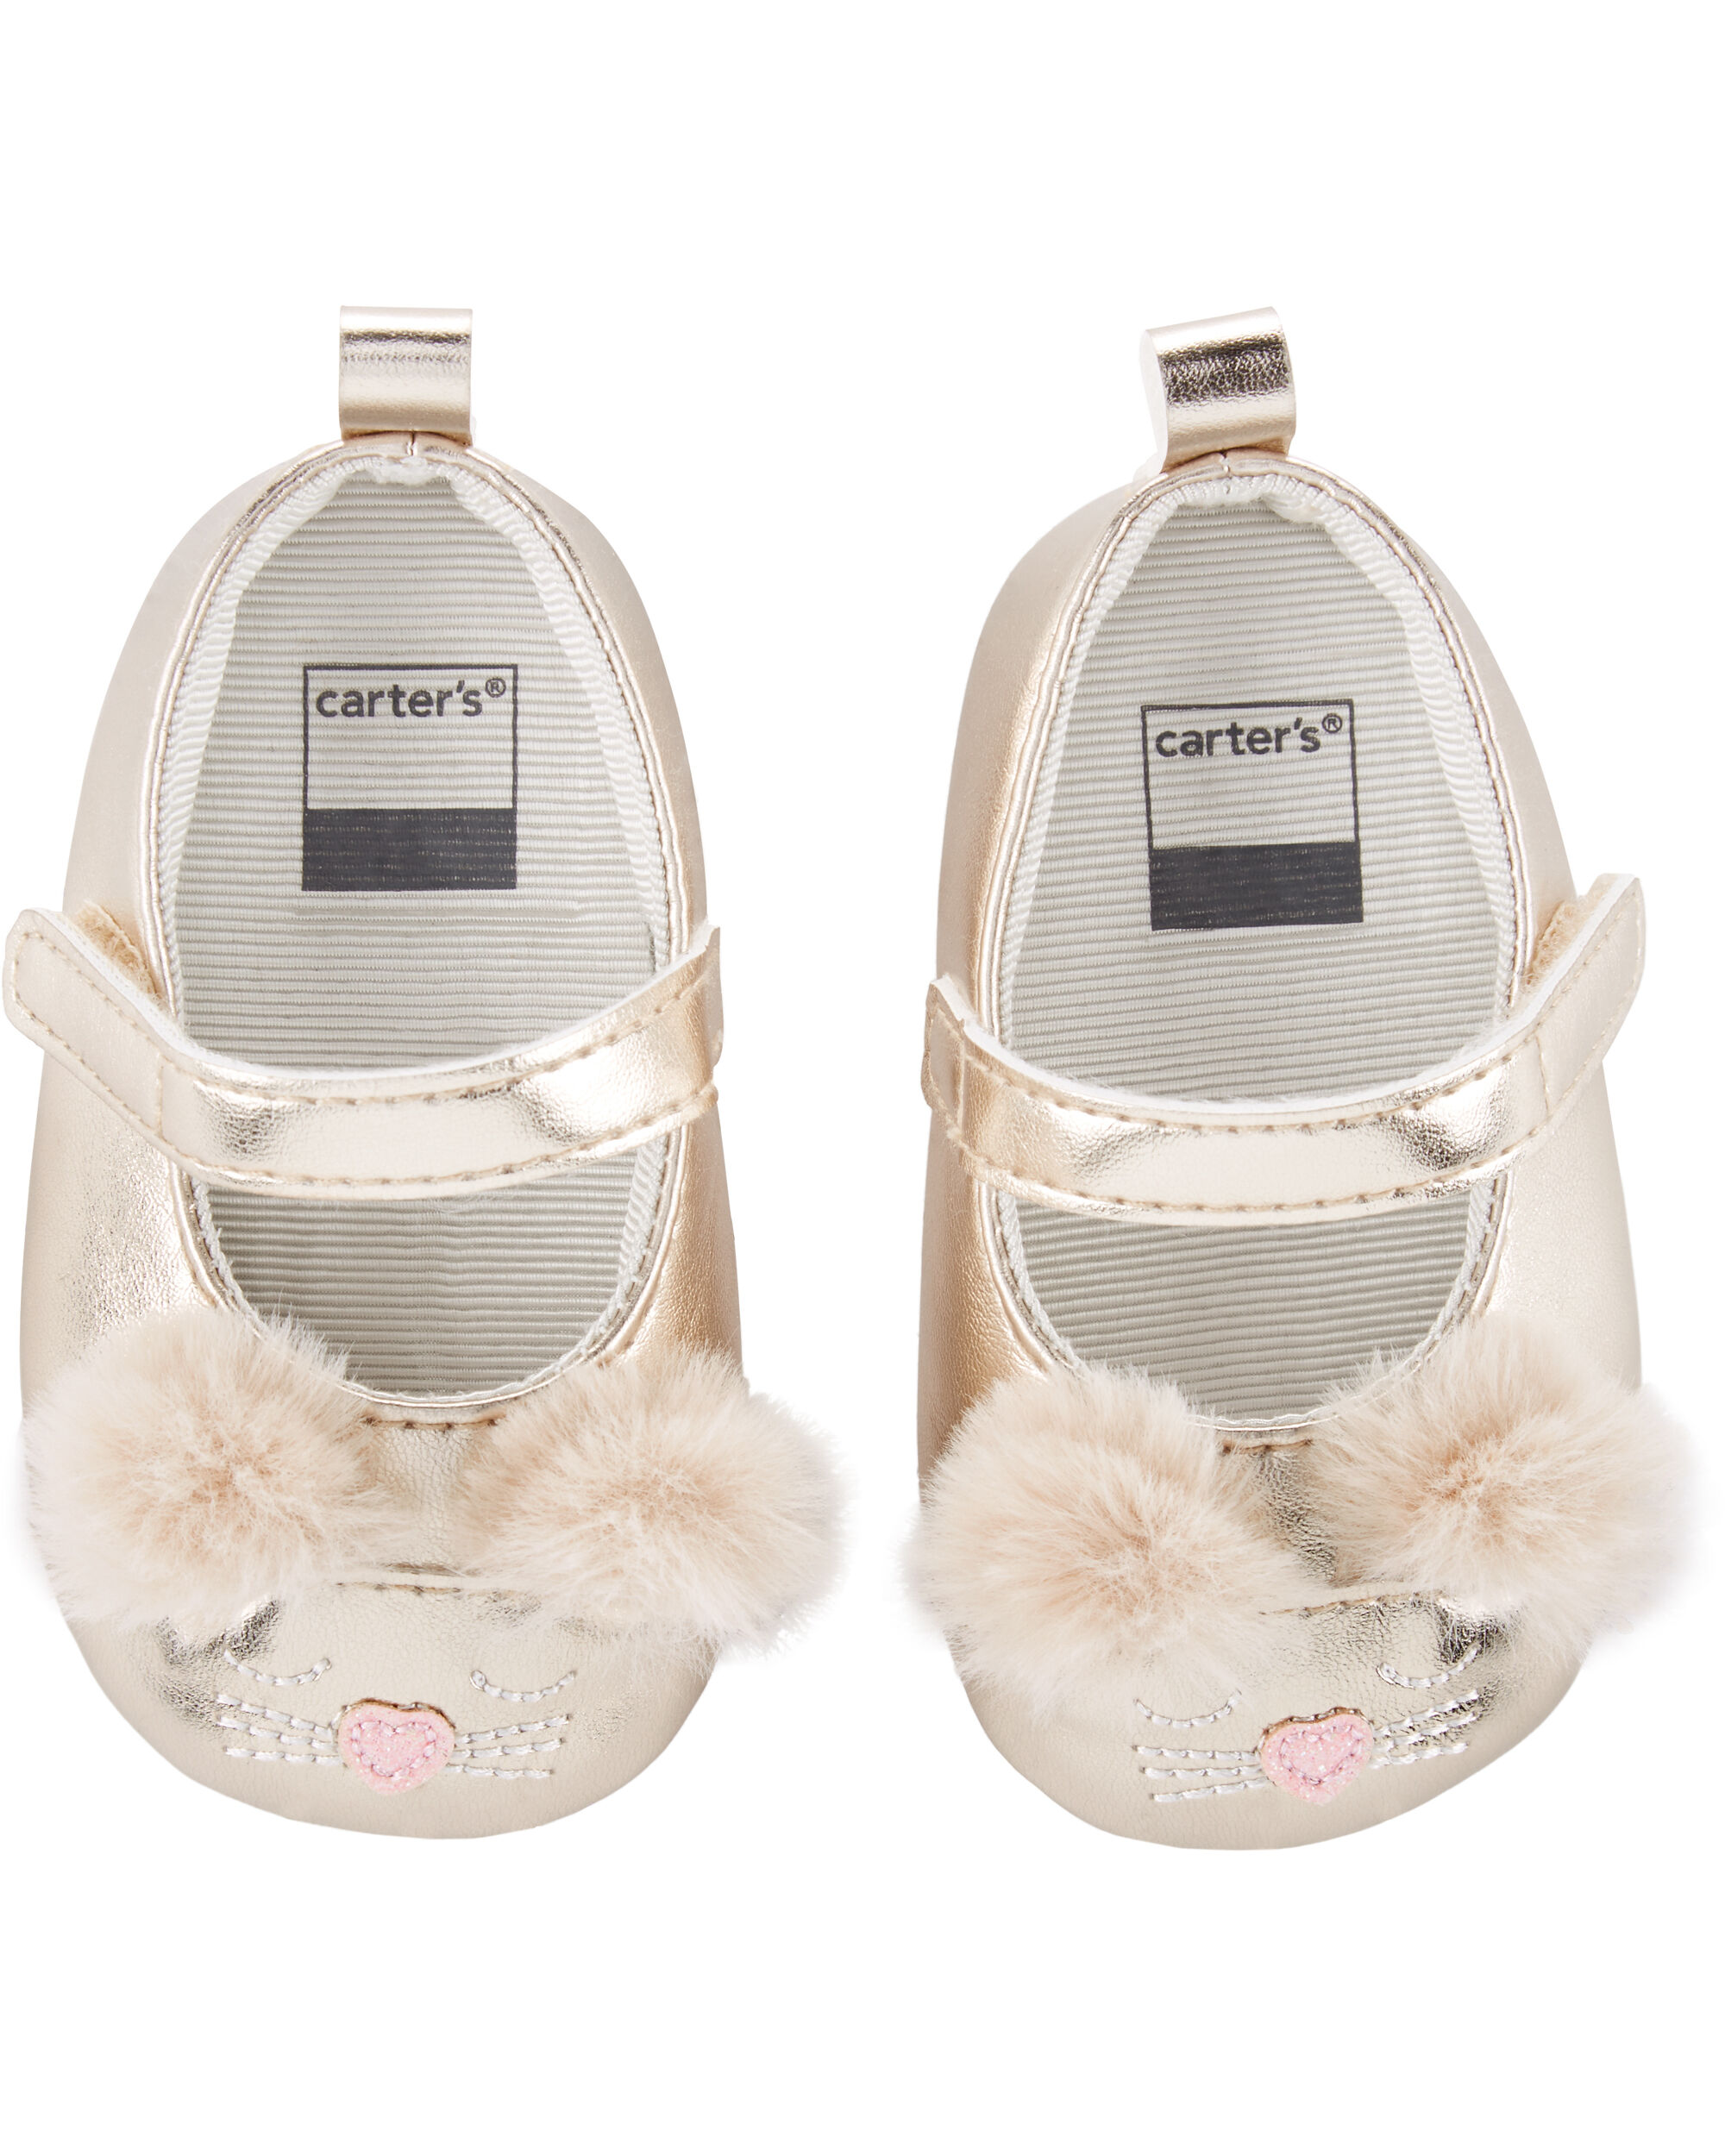 Carter's Mary Jane Baby Shoes | carters.com